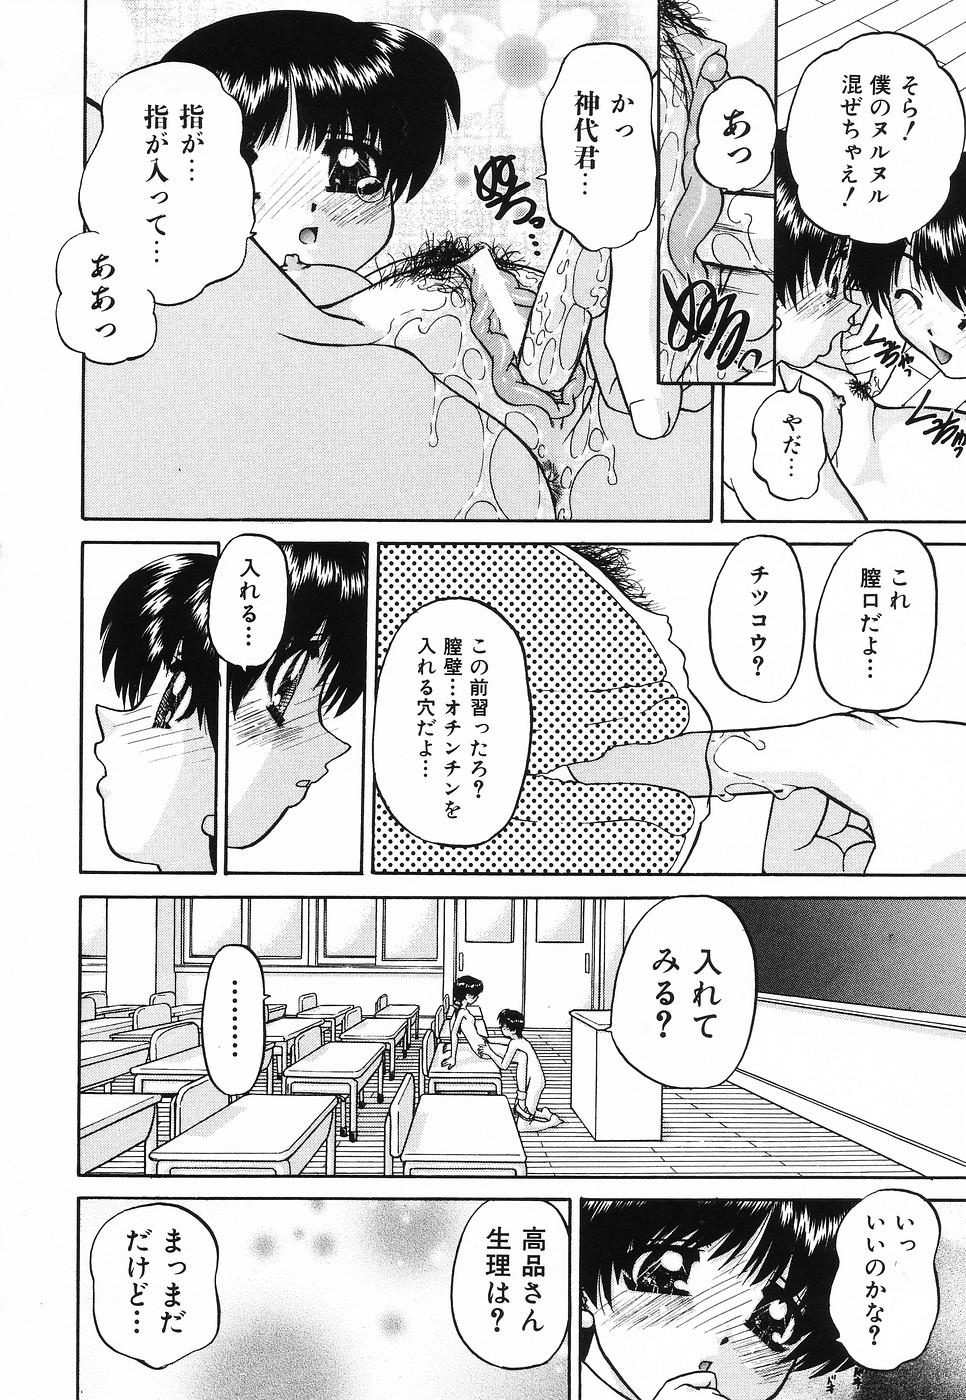 [Chunrouzan] Hime Hajime - First sexual intercourse in a New Year page 21 full